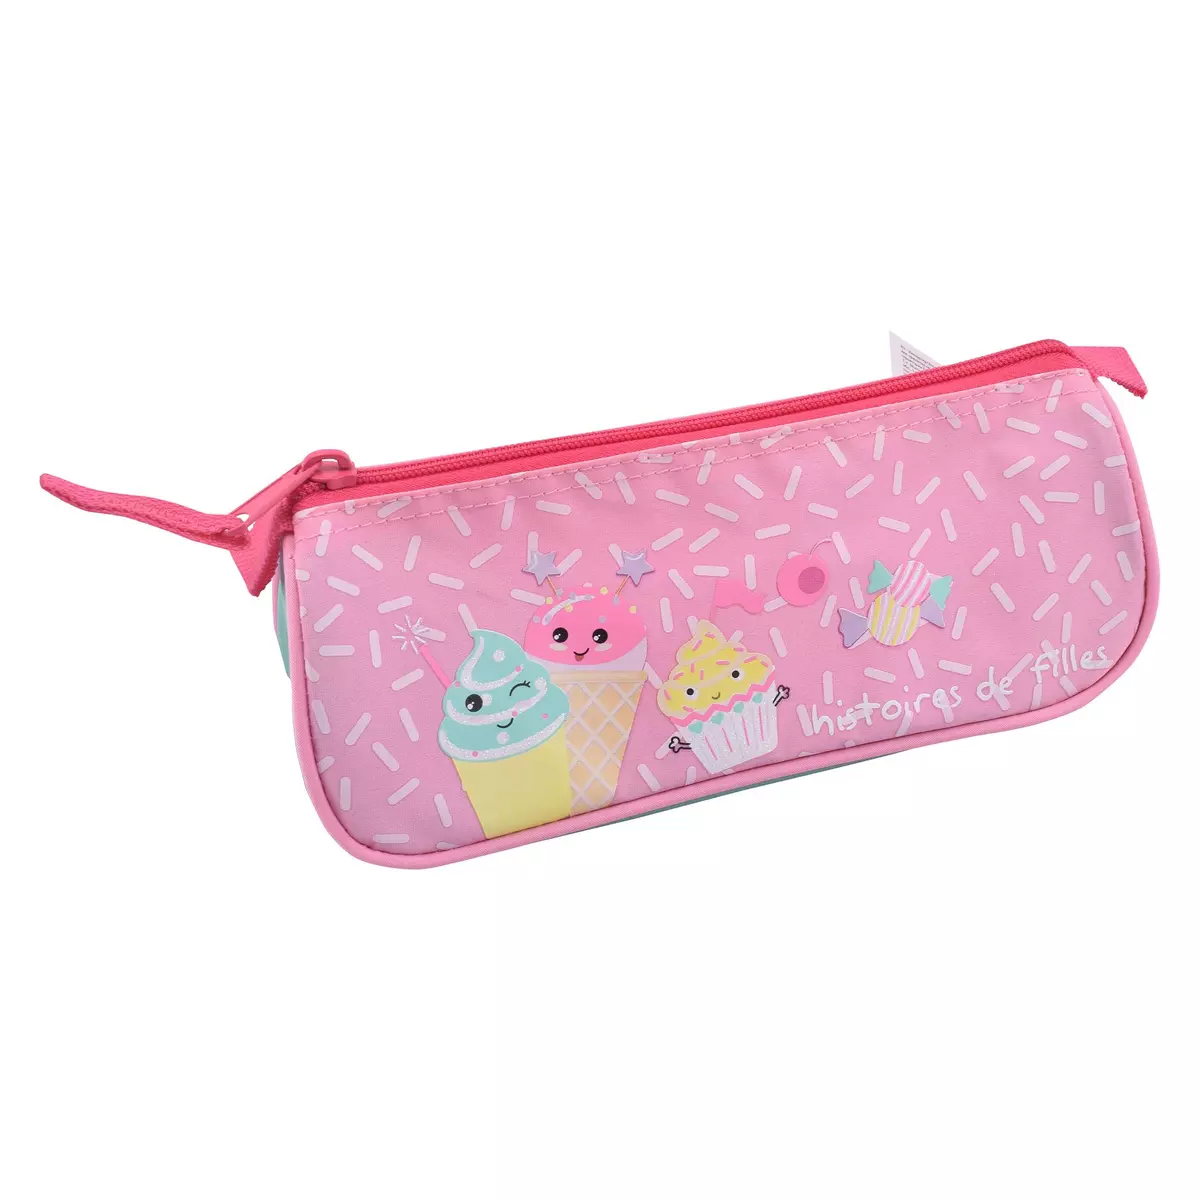 AUCHAN Trousse scolaire triangulaire polyester rose et vert CUPCAKE